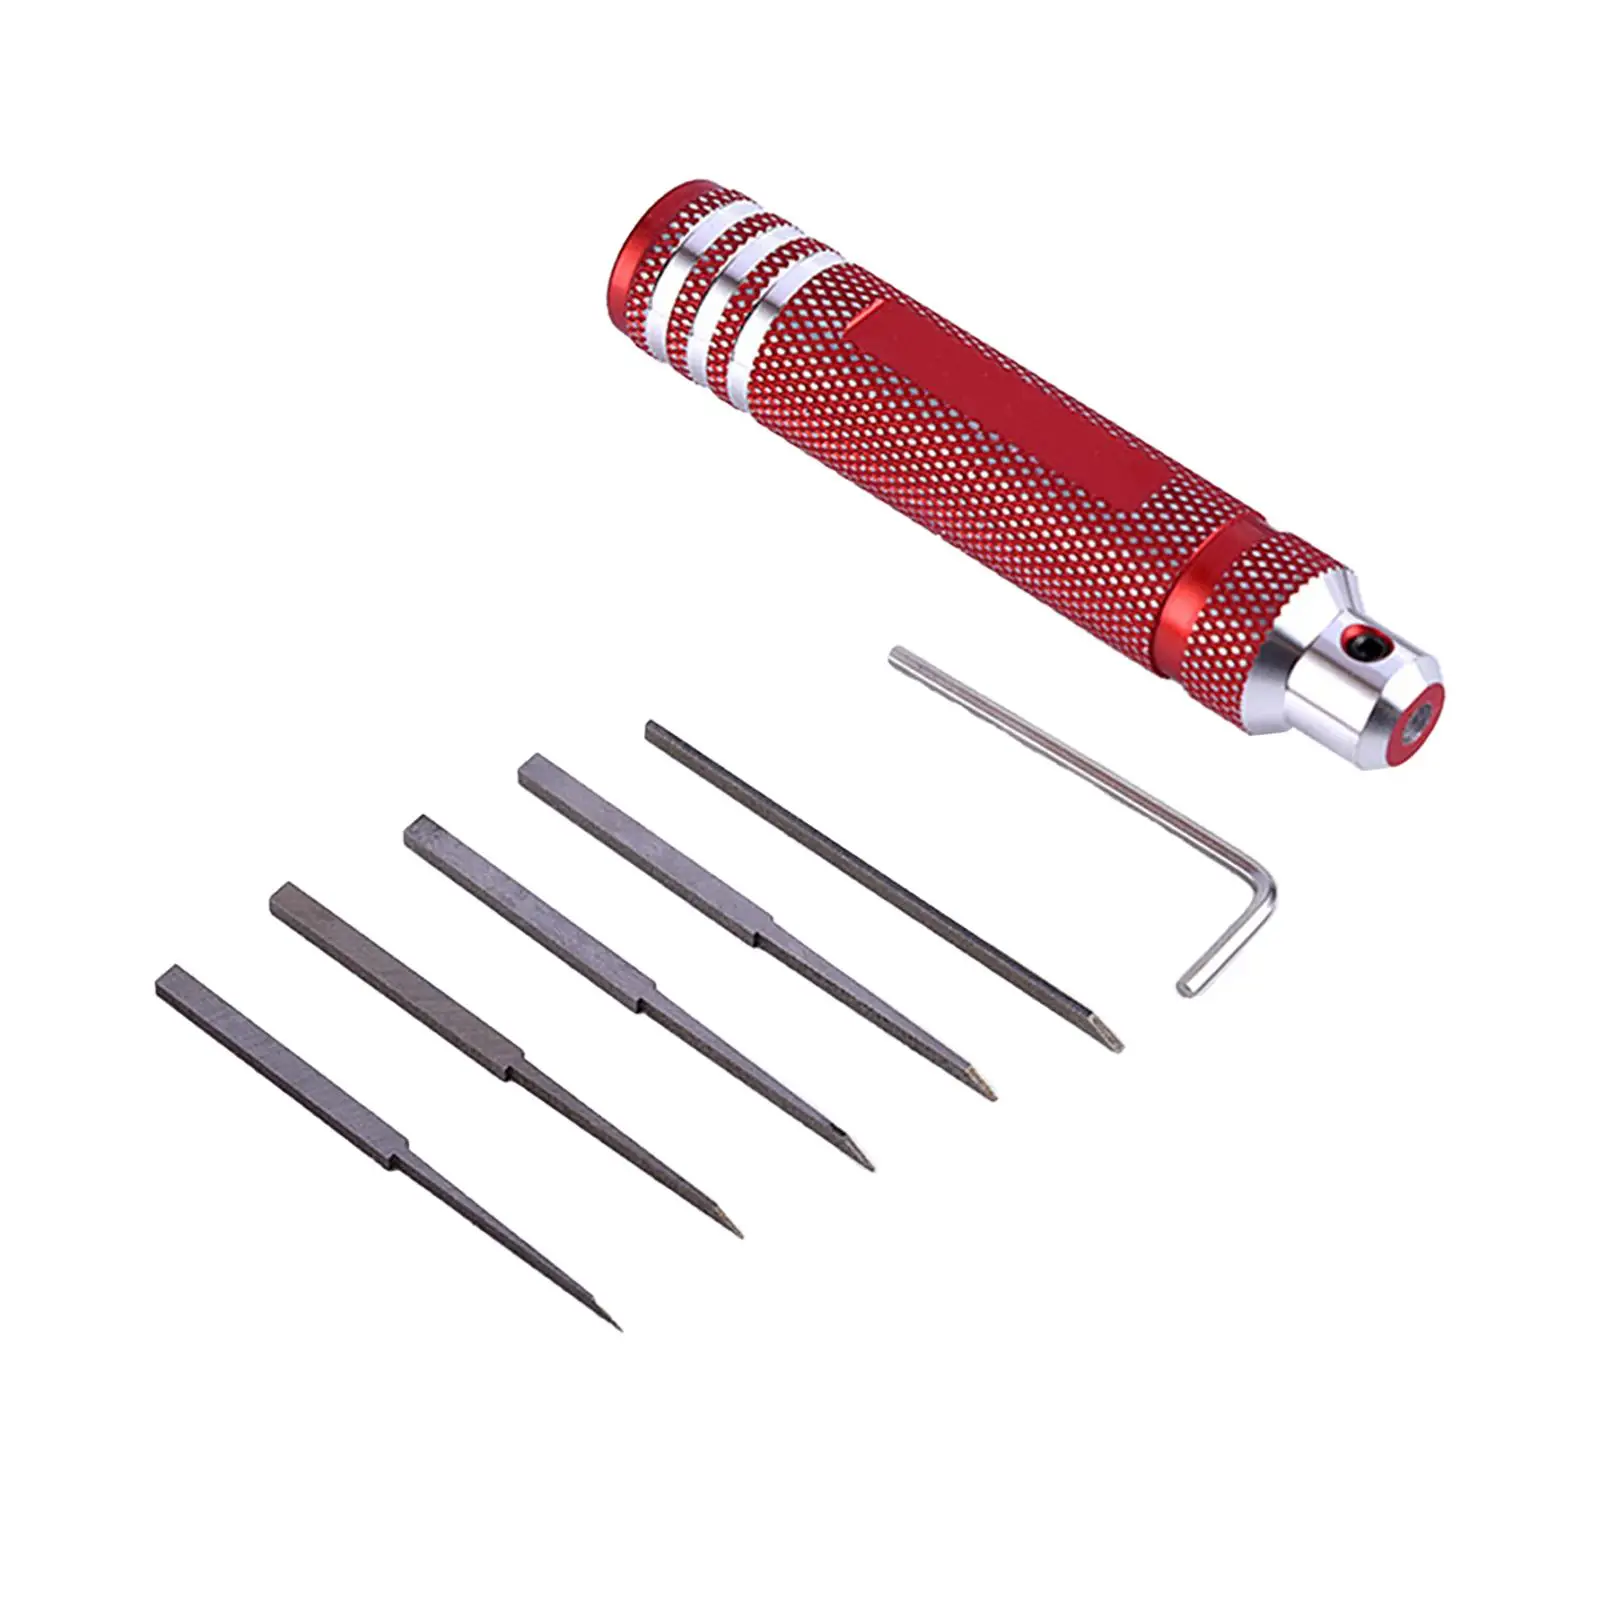 Model Scriber Tool Scriber Trimmer Precision Replacement Carving Knife for Clay Sculpture Pottery Modeling Resin Carved Carving